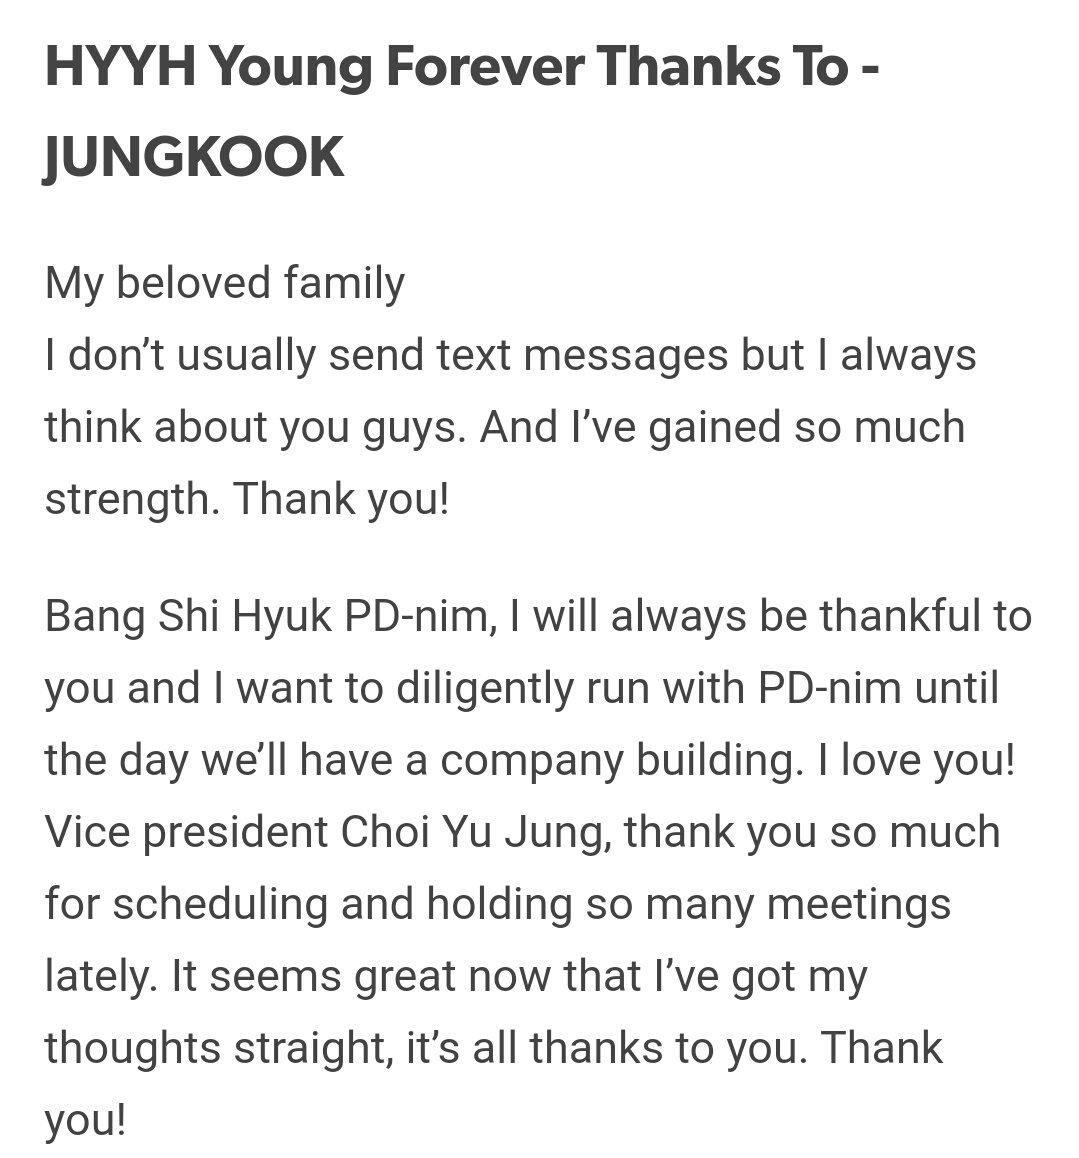 This Jungkook letter on HYYH album: Look at them now moving to their new big building soon 